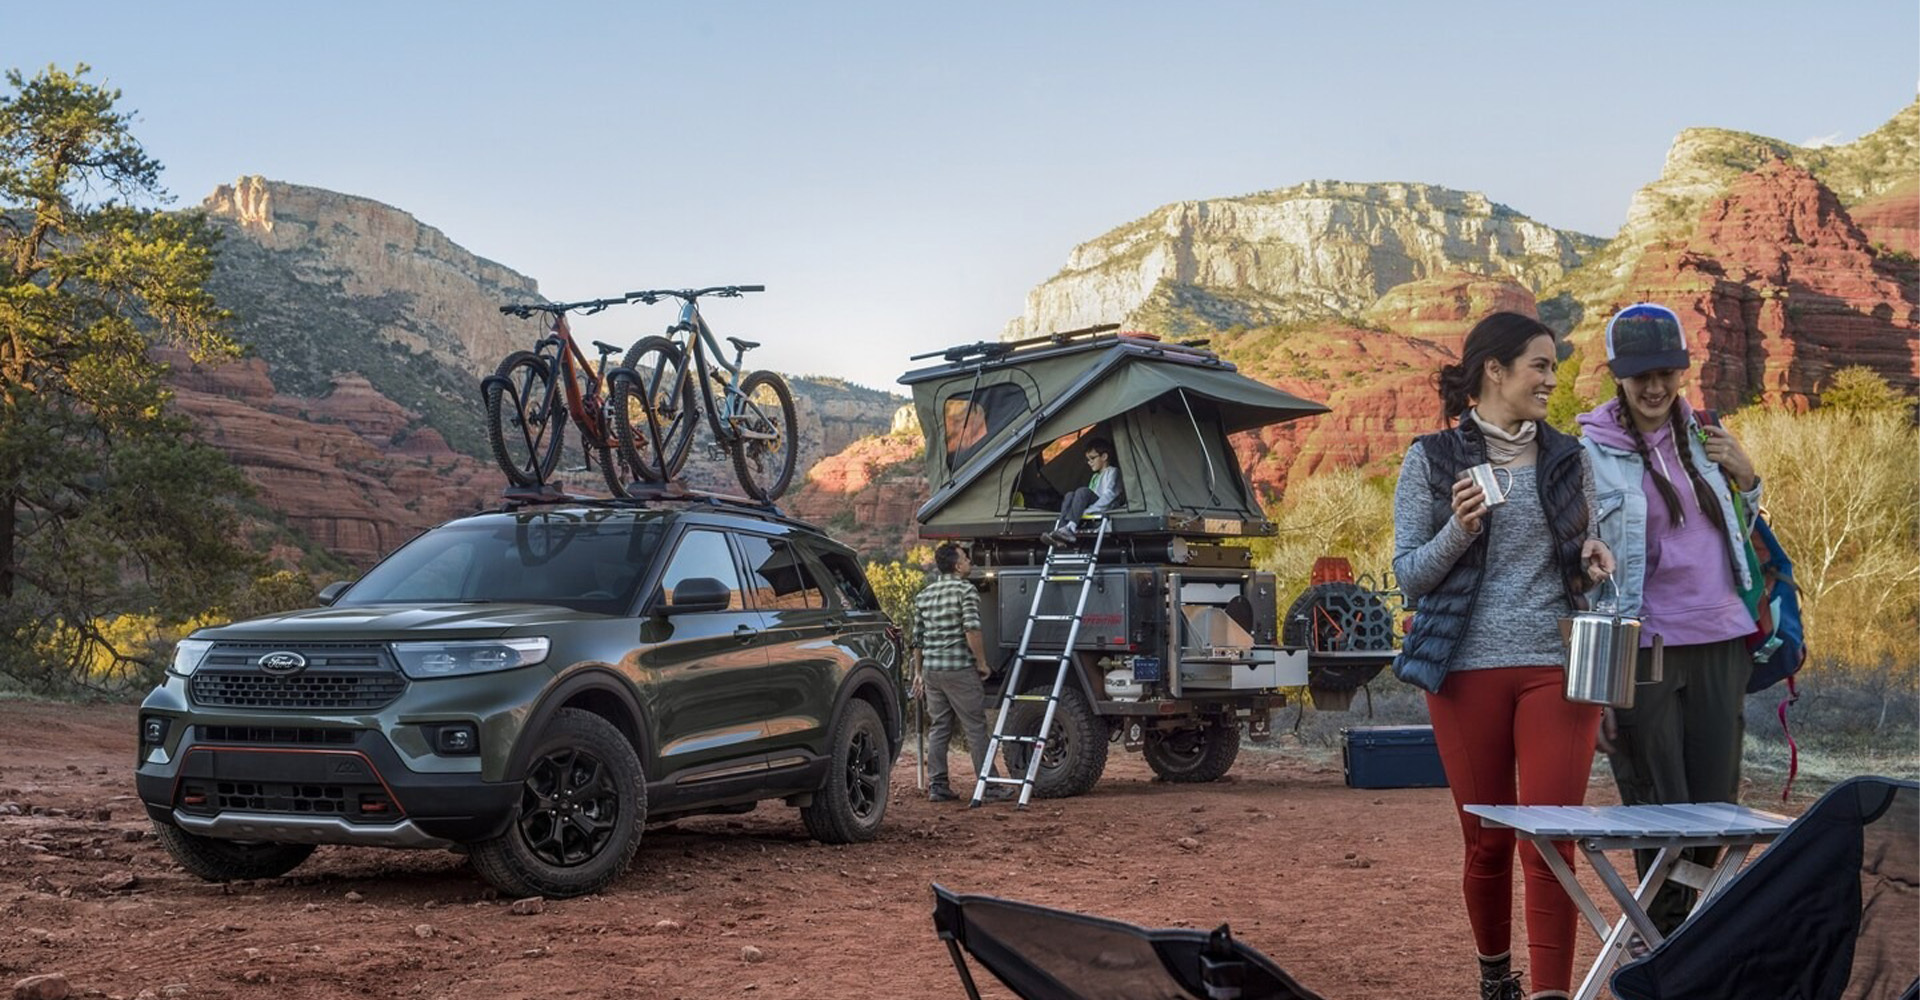 Best SUVs for Camping, Best SUVs for off Road Camping